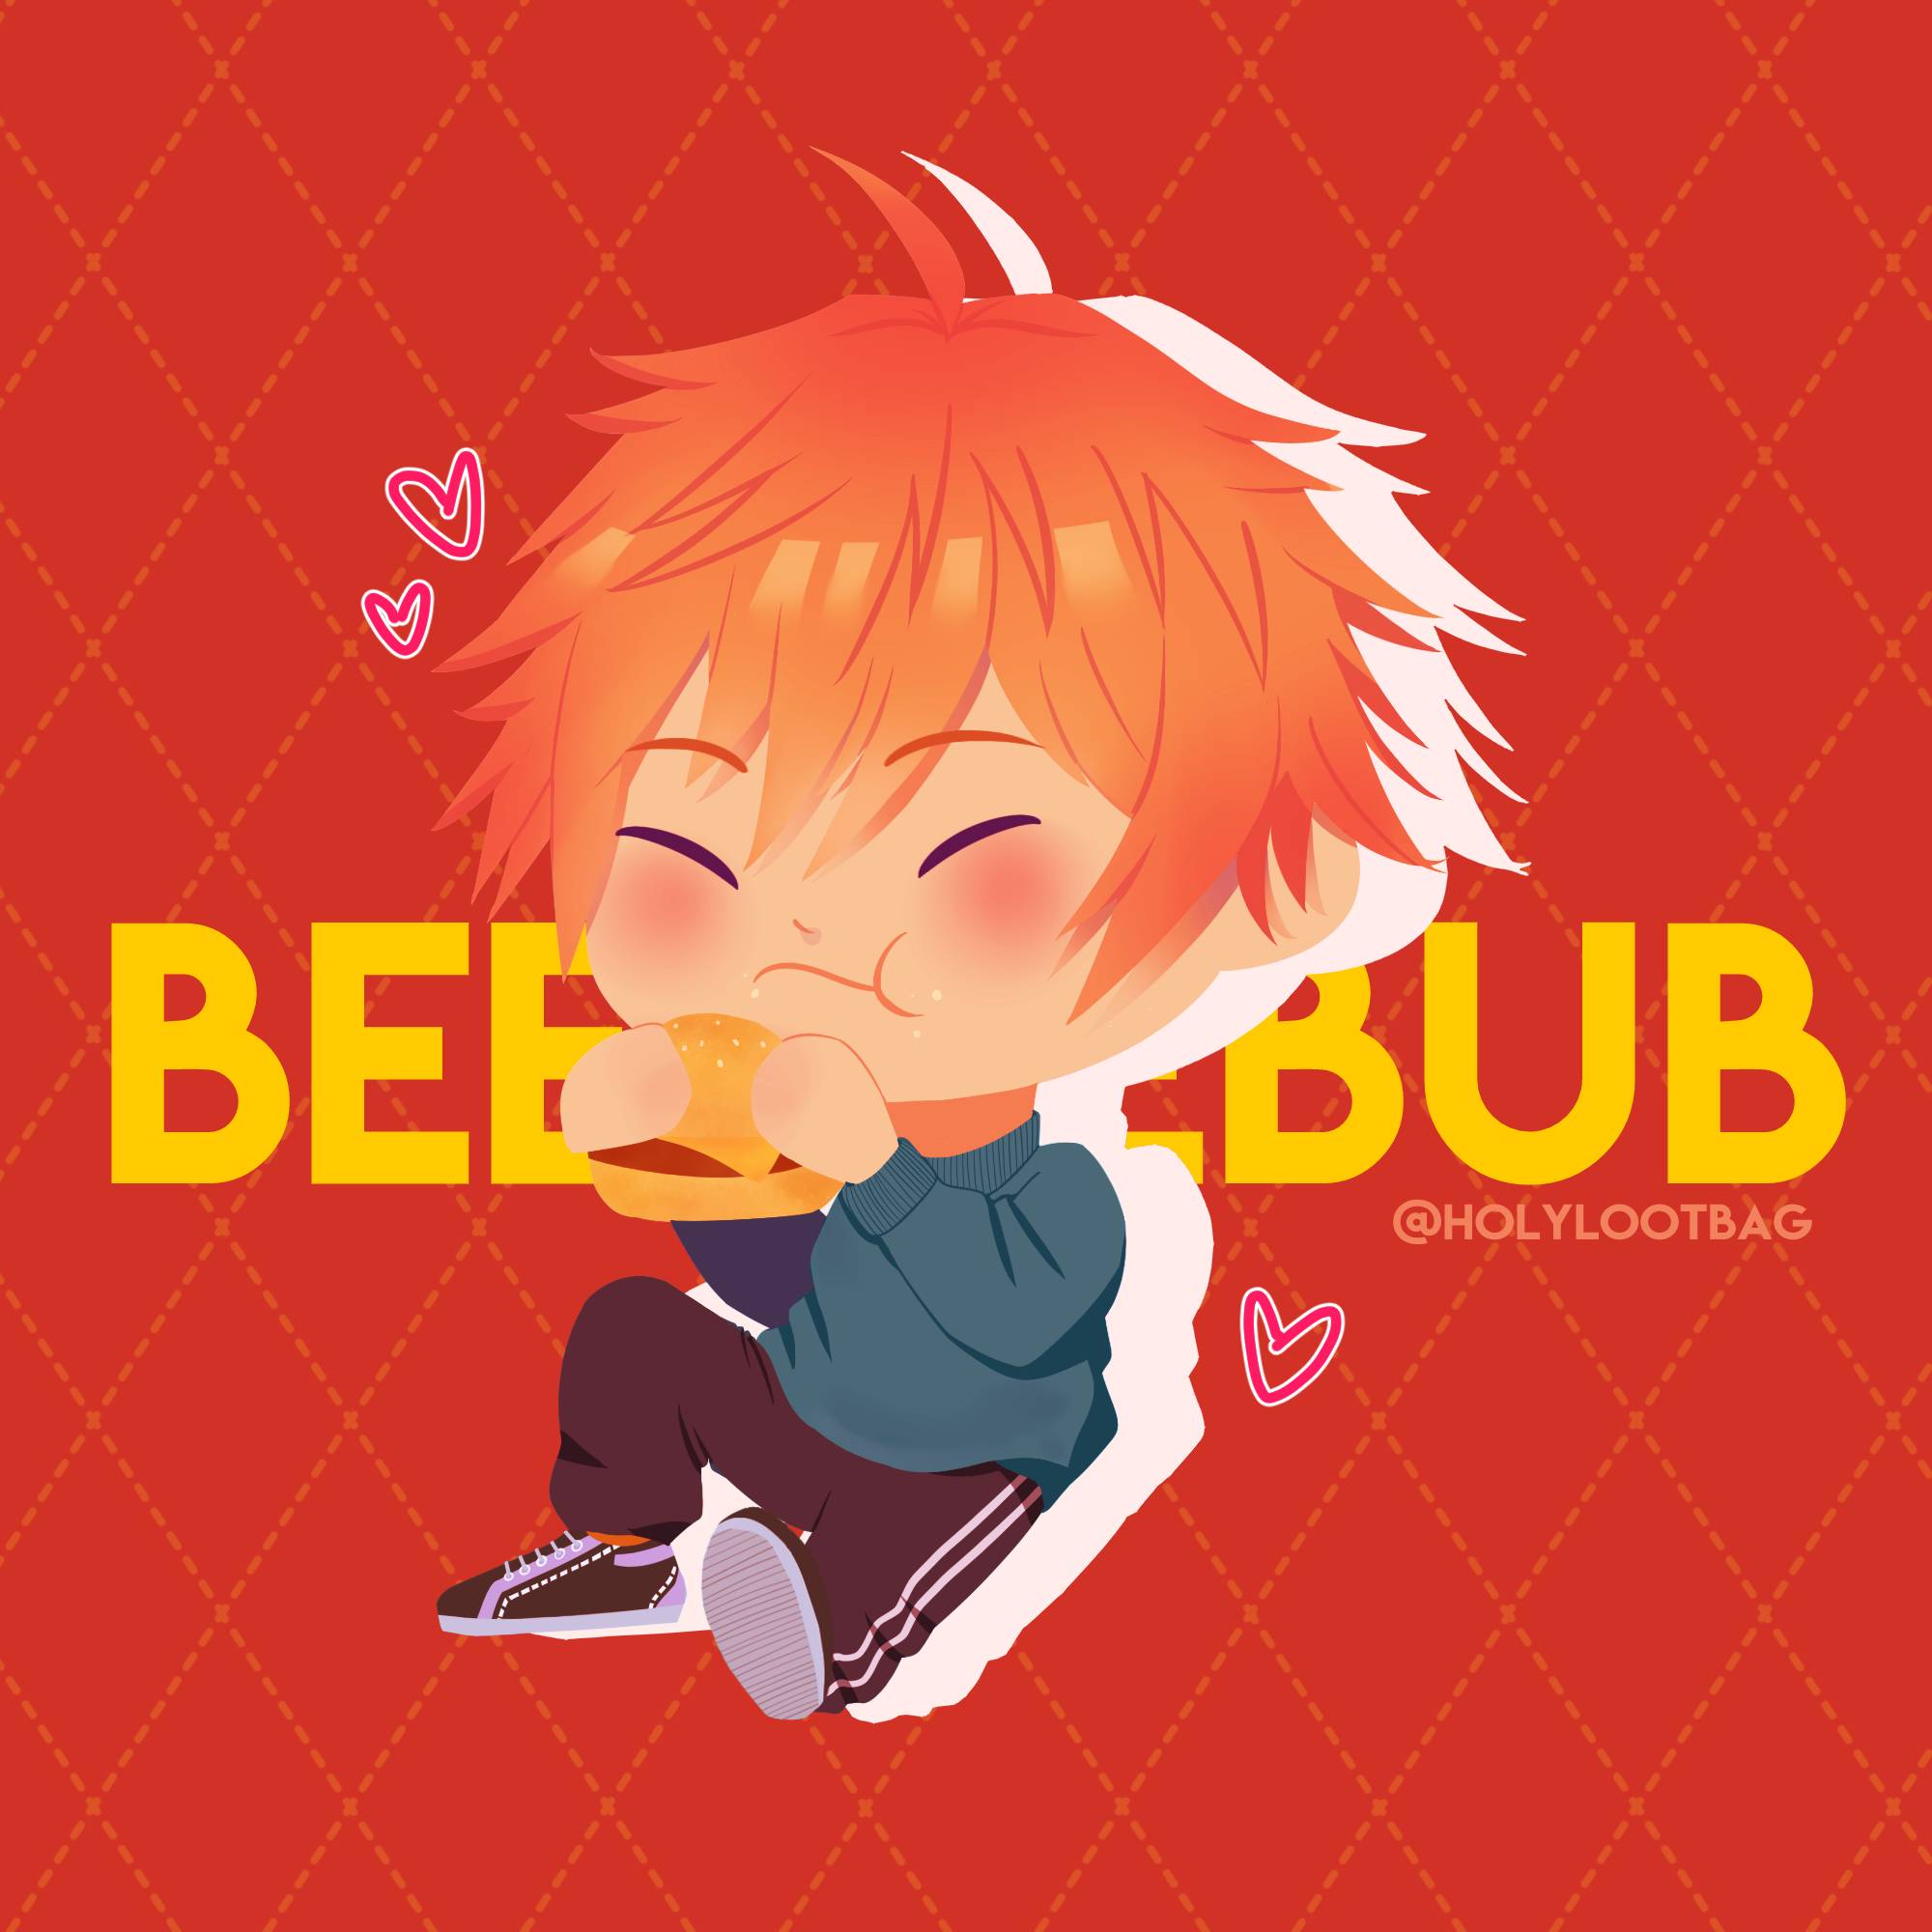 Chibi beelzebub from obey me by holylootbag on